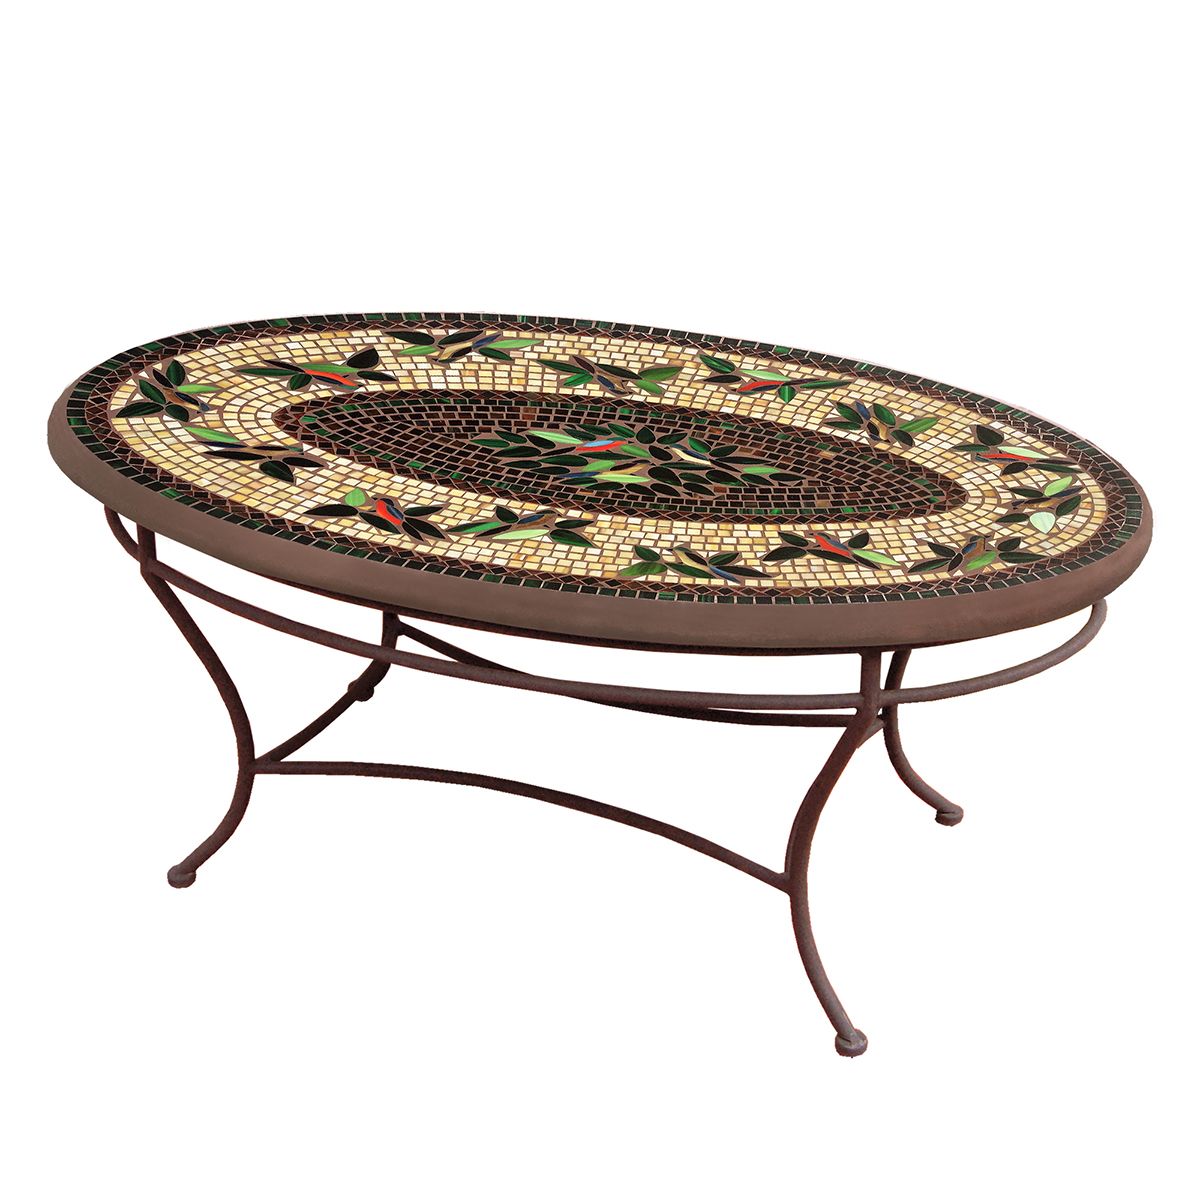 Finch Mosaic Coffee Table - Oval-Iron Accents